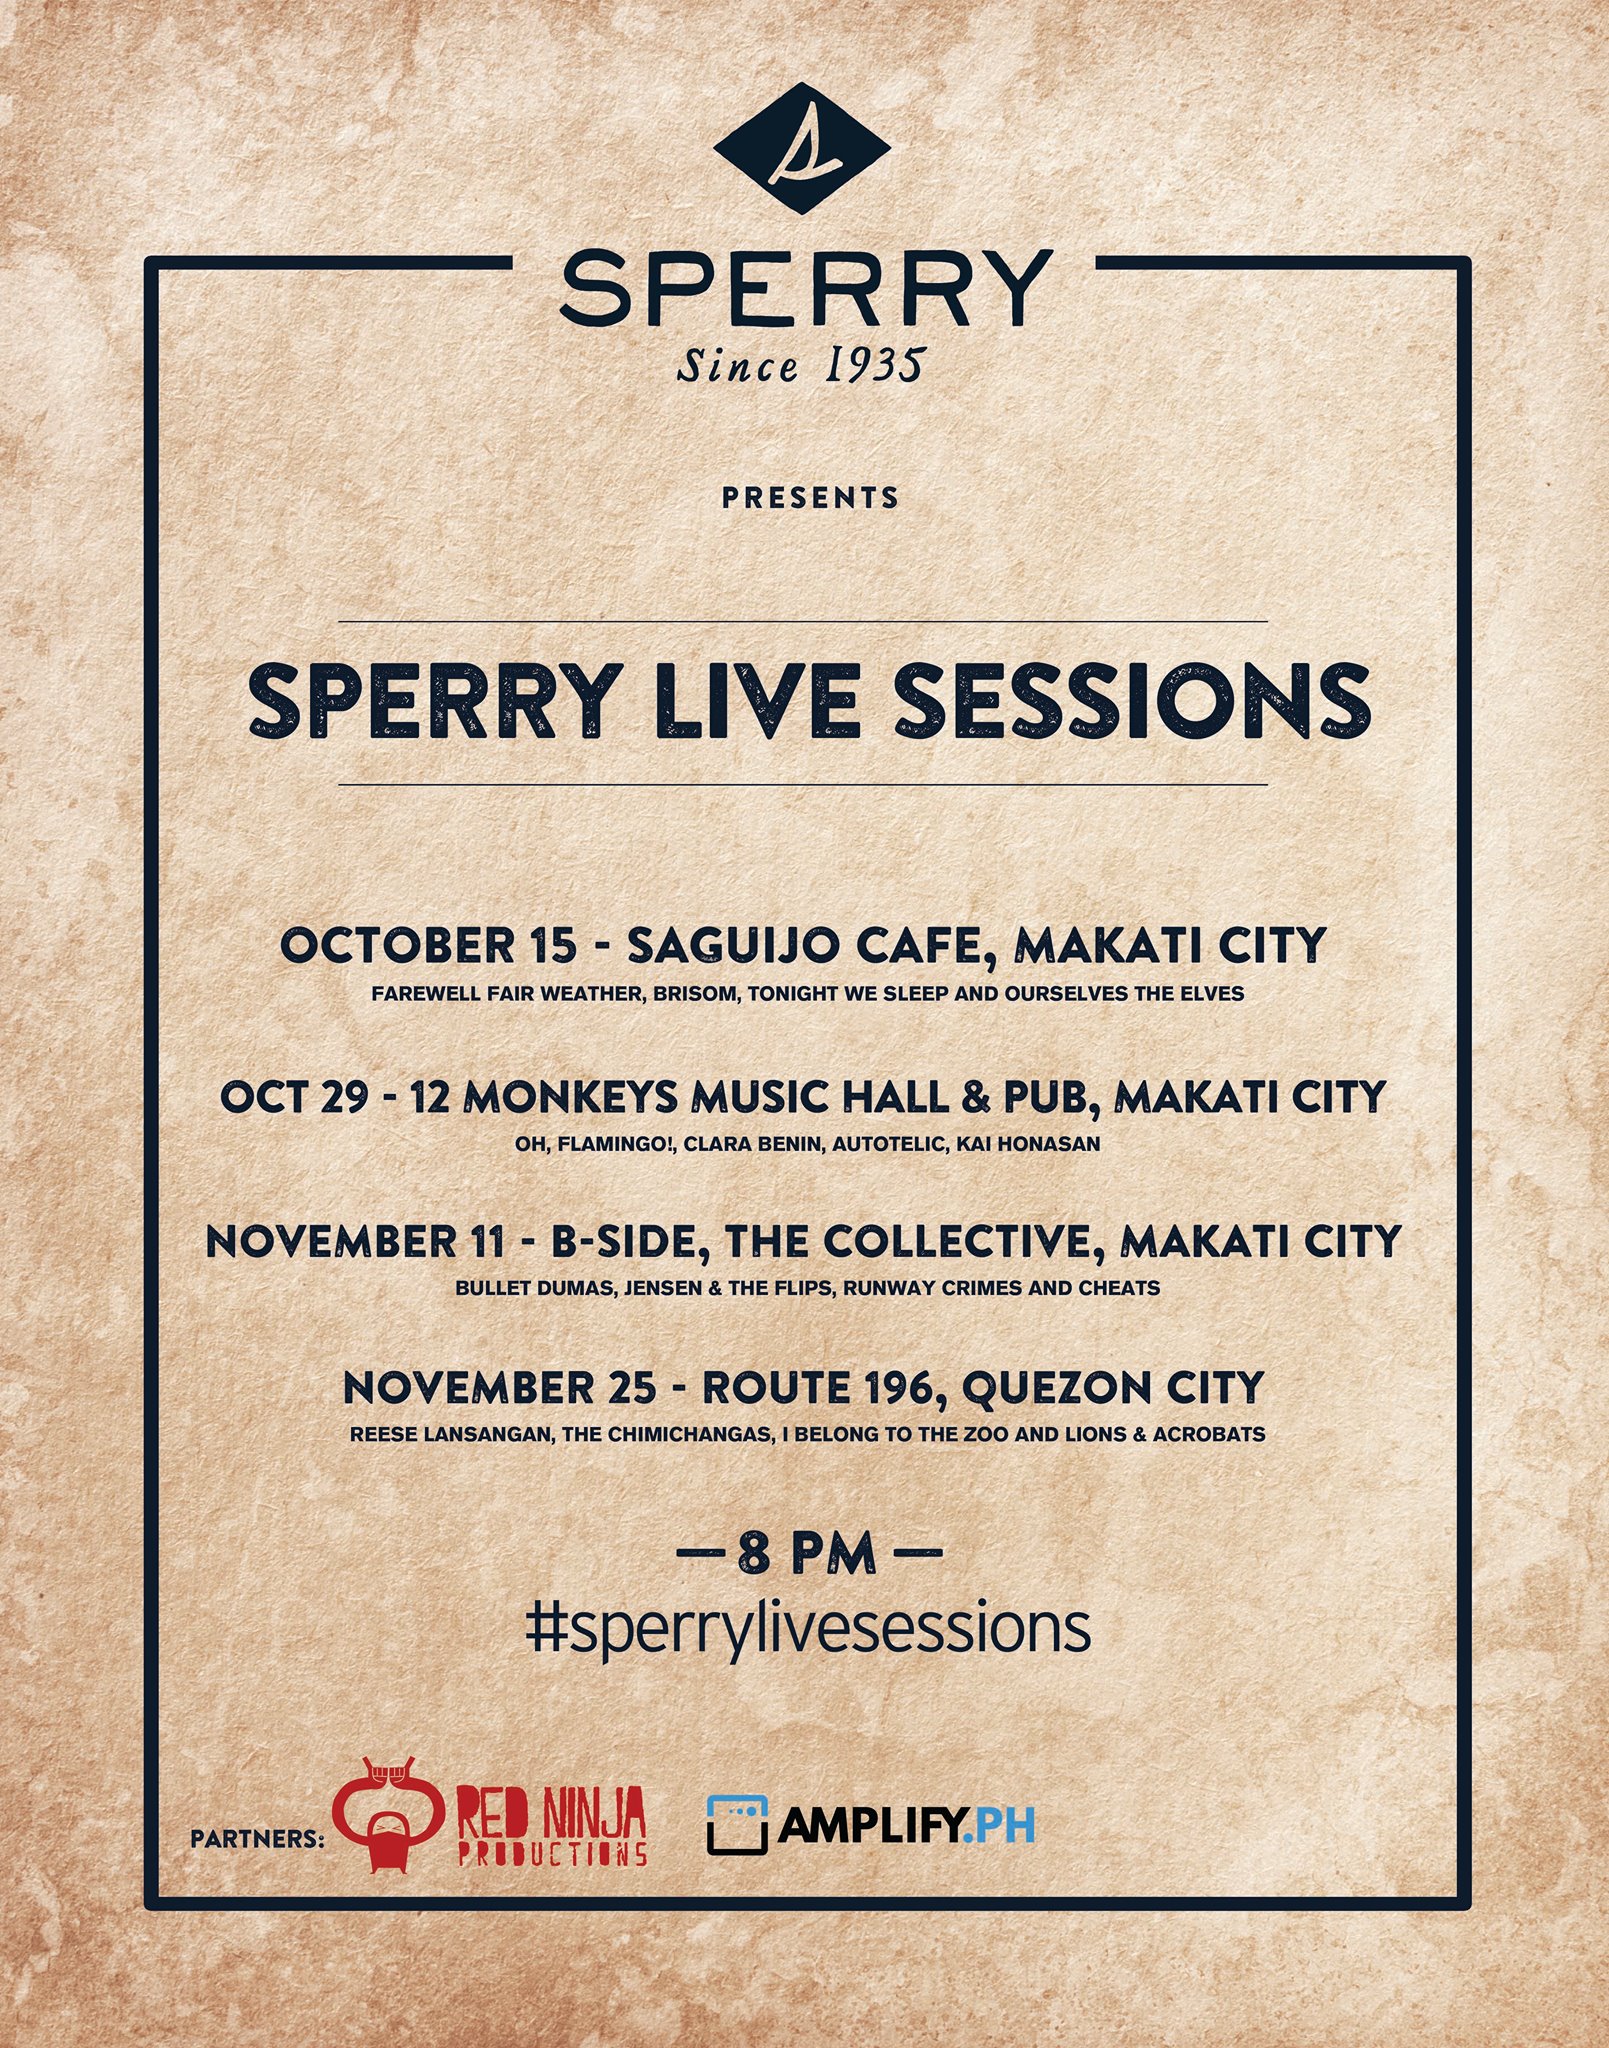 SPERRY LIVE SESSIONS at Saguijo Thursday at 8:00pm 2 days from now · 89°F / 75°F Chance of a Thunderstorm Show Map saGuijo Cafe + Bar Events 7612 Guijo Street, San Antonio Village, 1203 Makati, Philippines October 15, 2015 Saguijo Cafe 8:00 PM with performances by FAREWELL FAIR WEATHER OURSELVES THE ELVES BRISOM TONIGHT WE SLEEP 200 pesos gets you in with a free drink! special thanks to: SPERRY AMPLIFY.PH